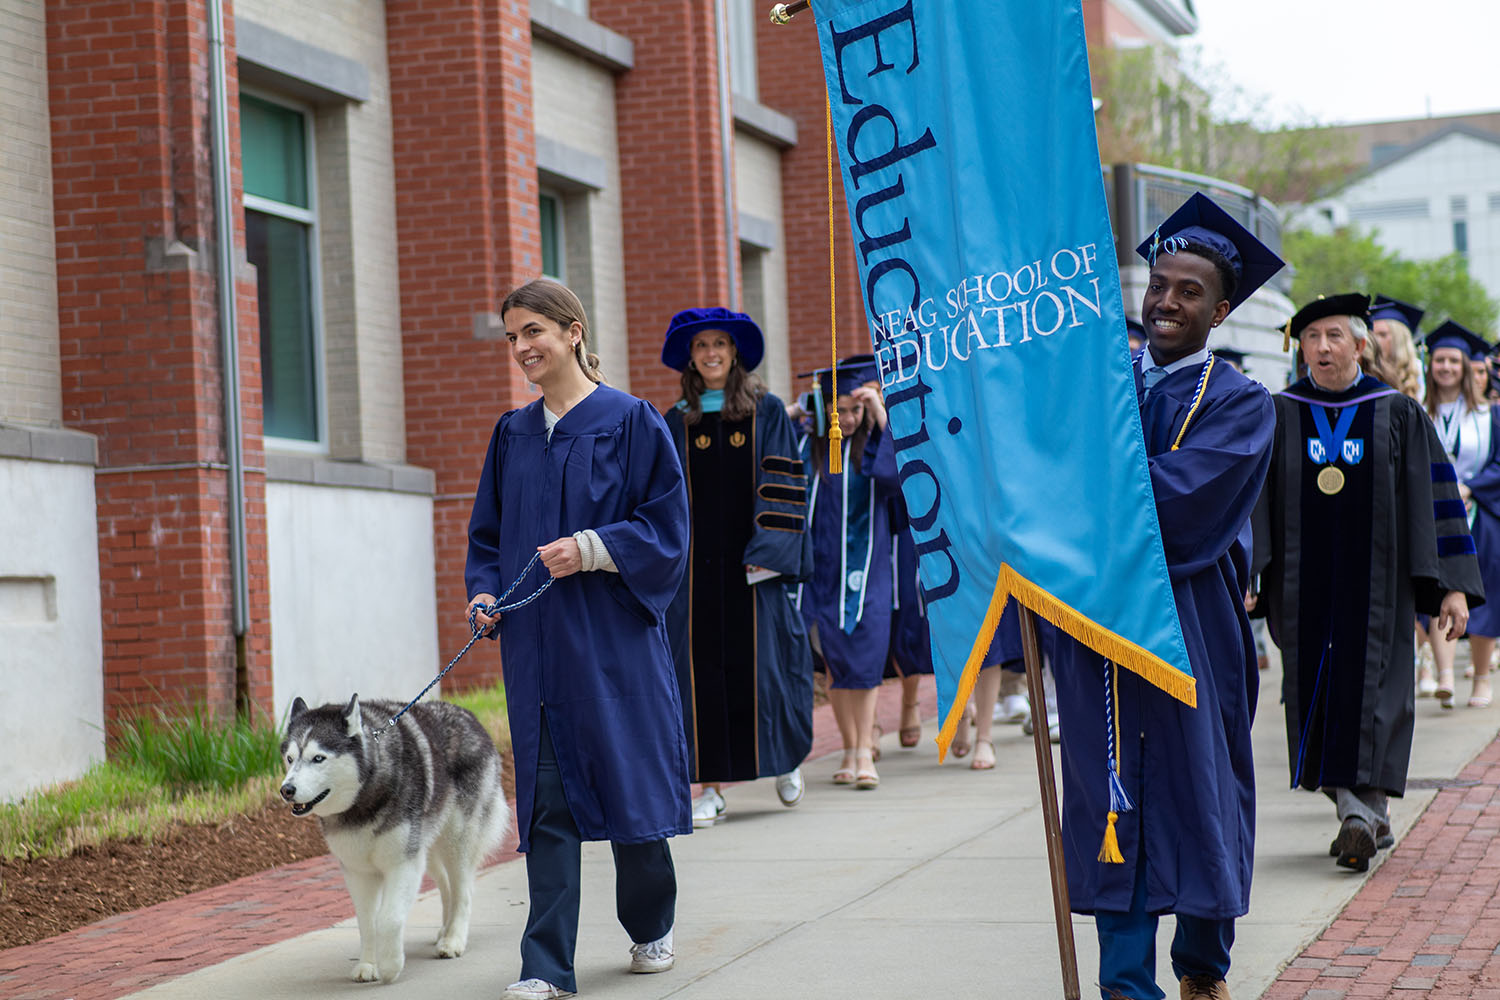 Neag School Class of 2024 graduates process alongside the Gentry Building led by a Black male student carrying the School's light blue banner.